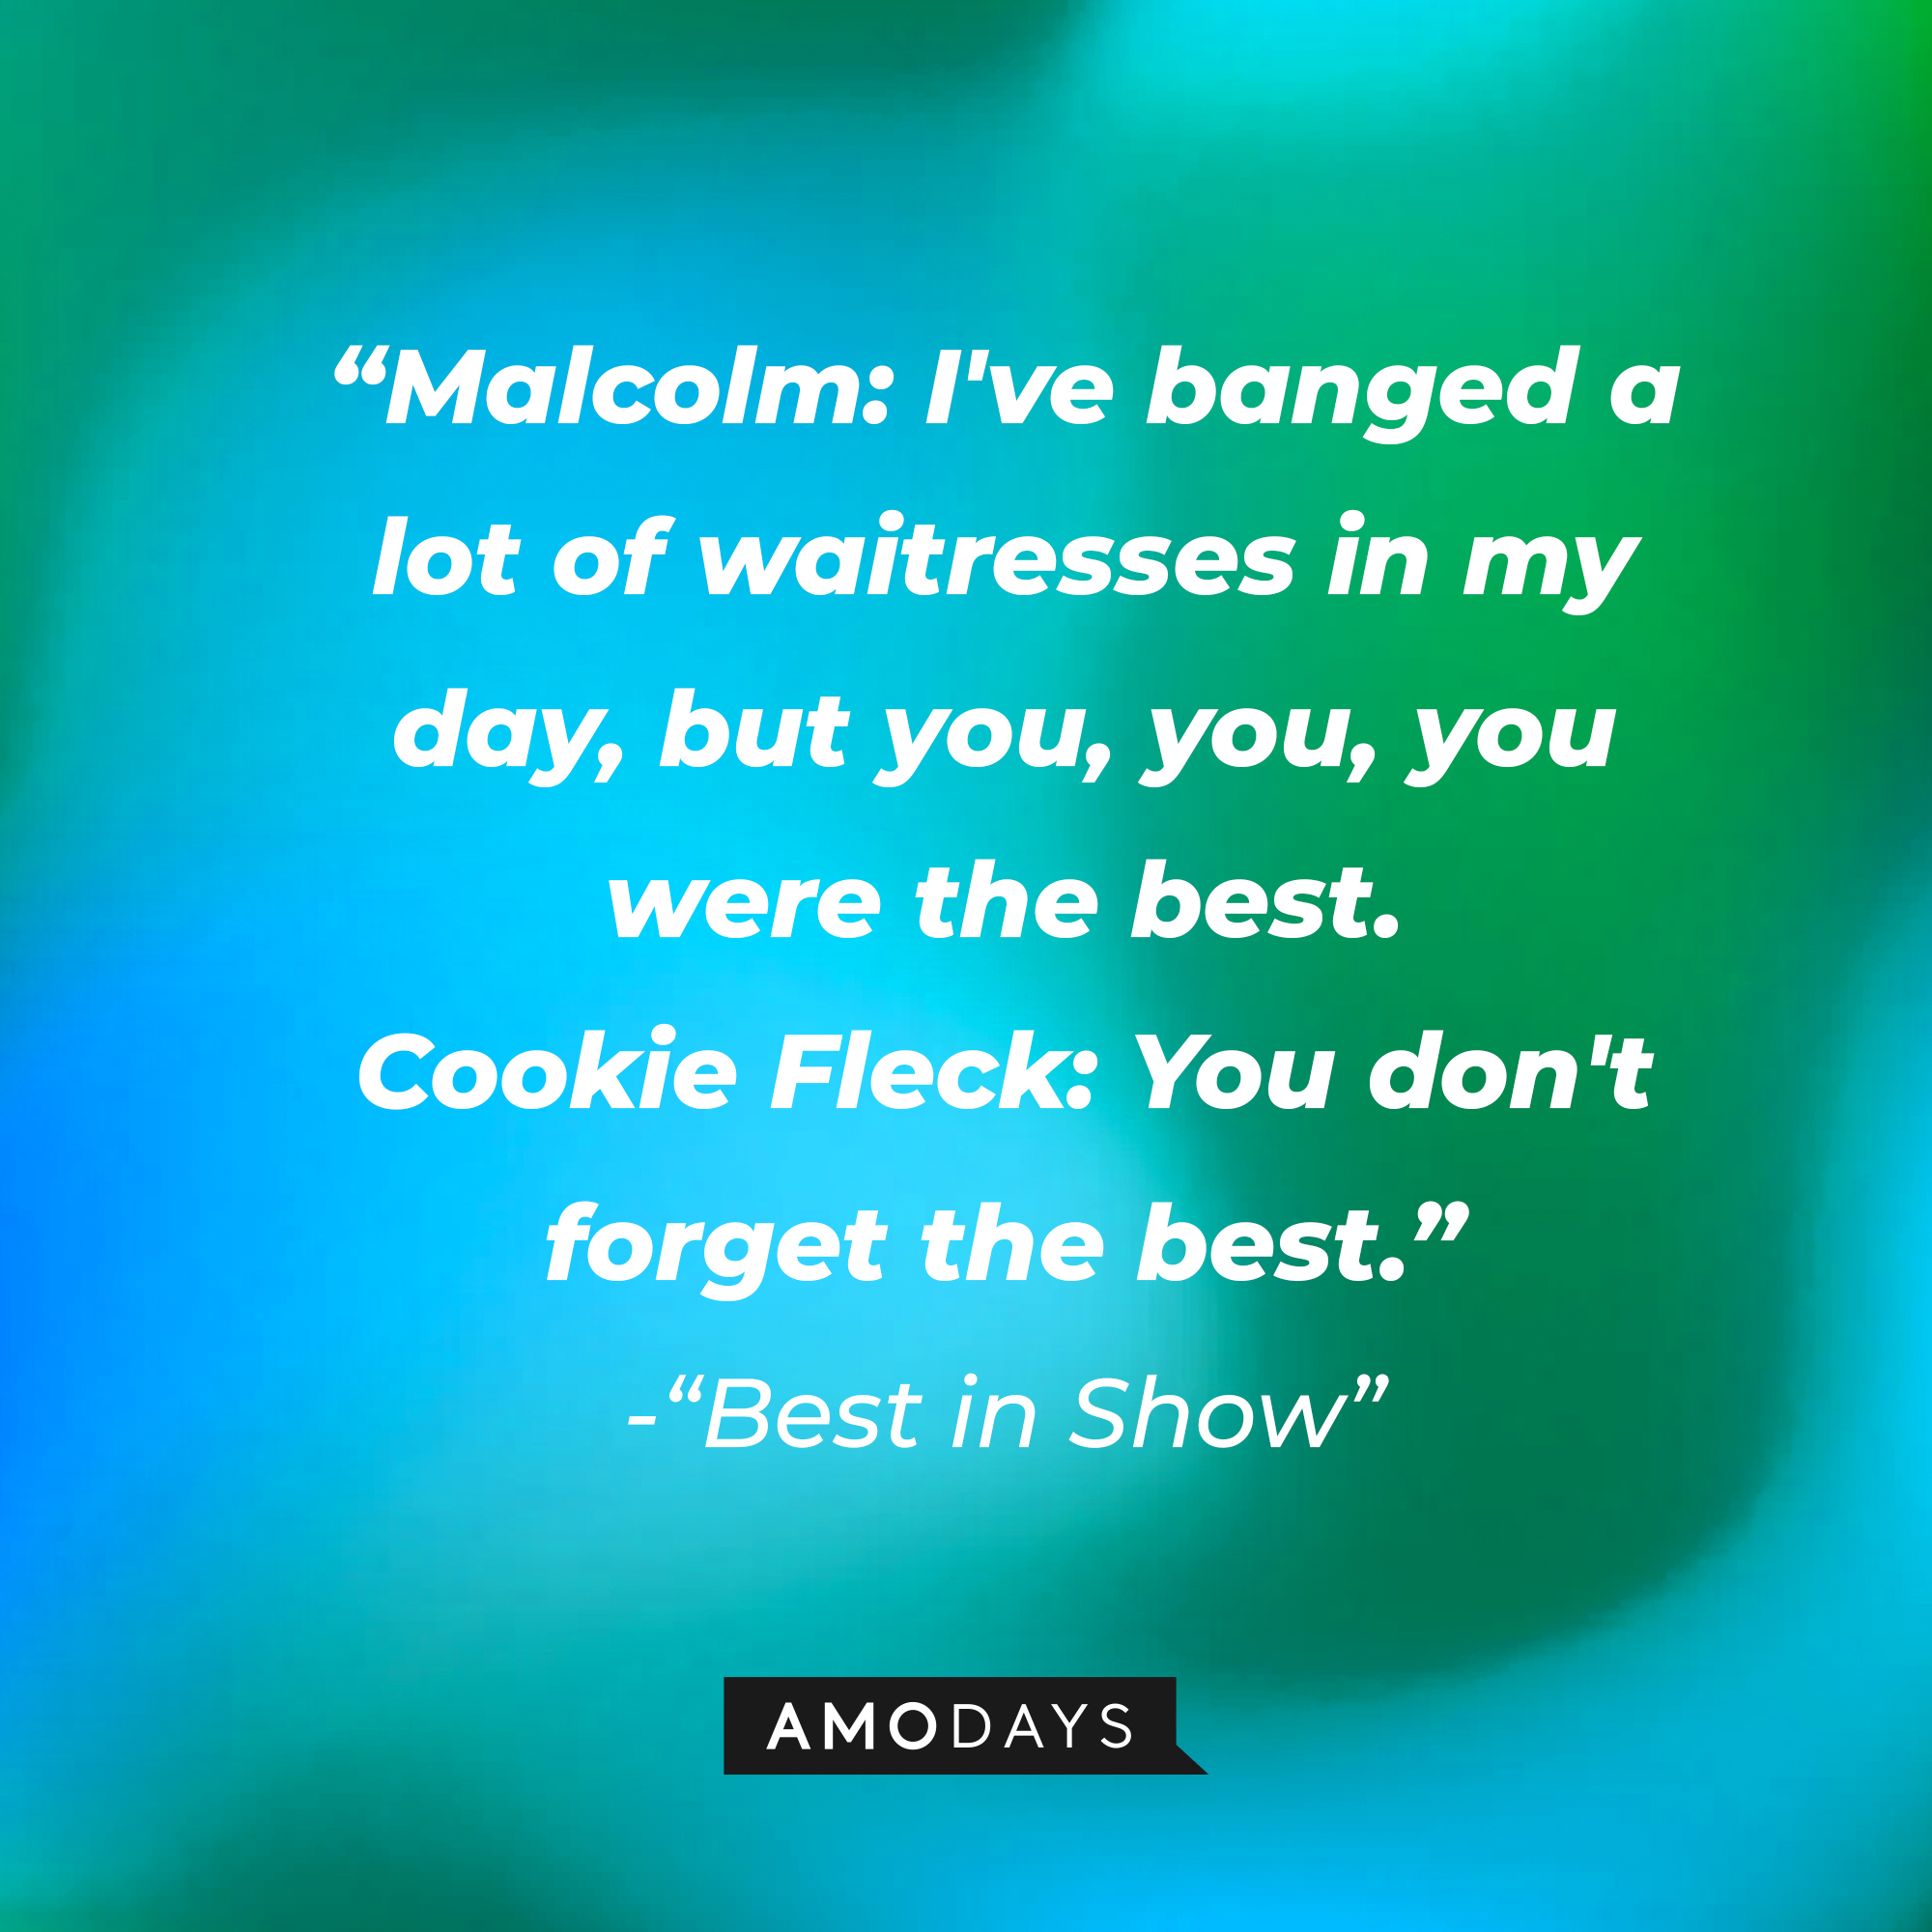 Gerry Fleck's quote in "Best in Show:" "Malcolm: I've banged a lot of waitresses in my day, but you, you, you were the best. ; Cookie Fleck: You don't forget the best.” | Source: AmoDays